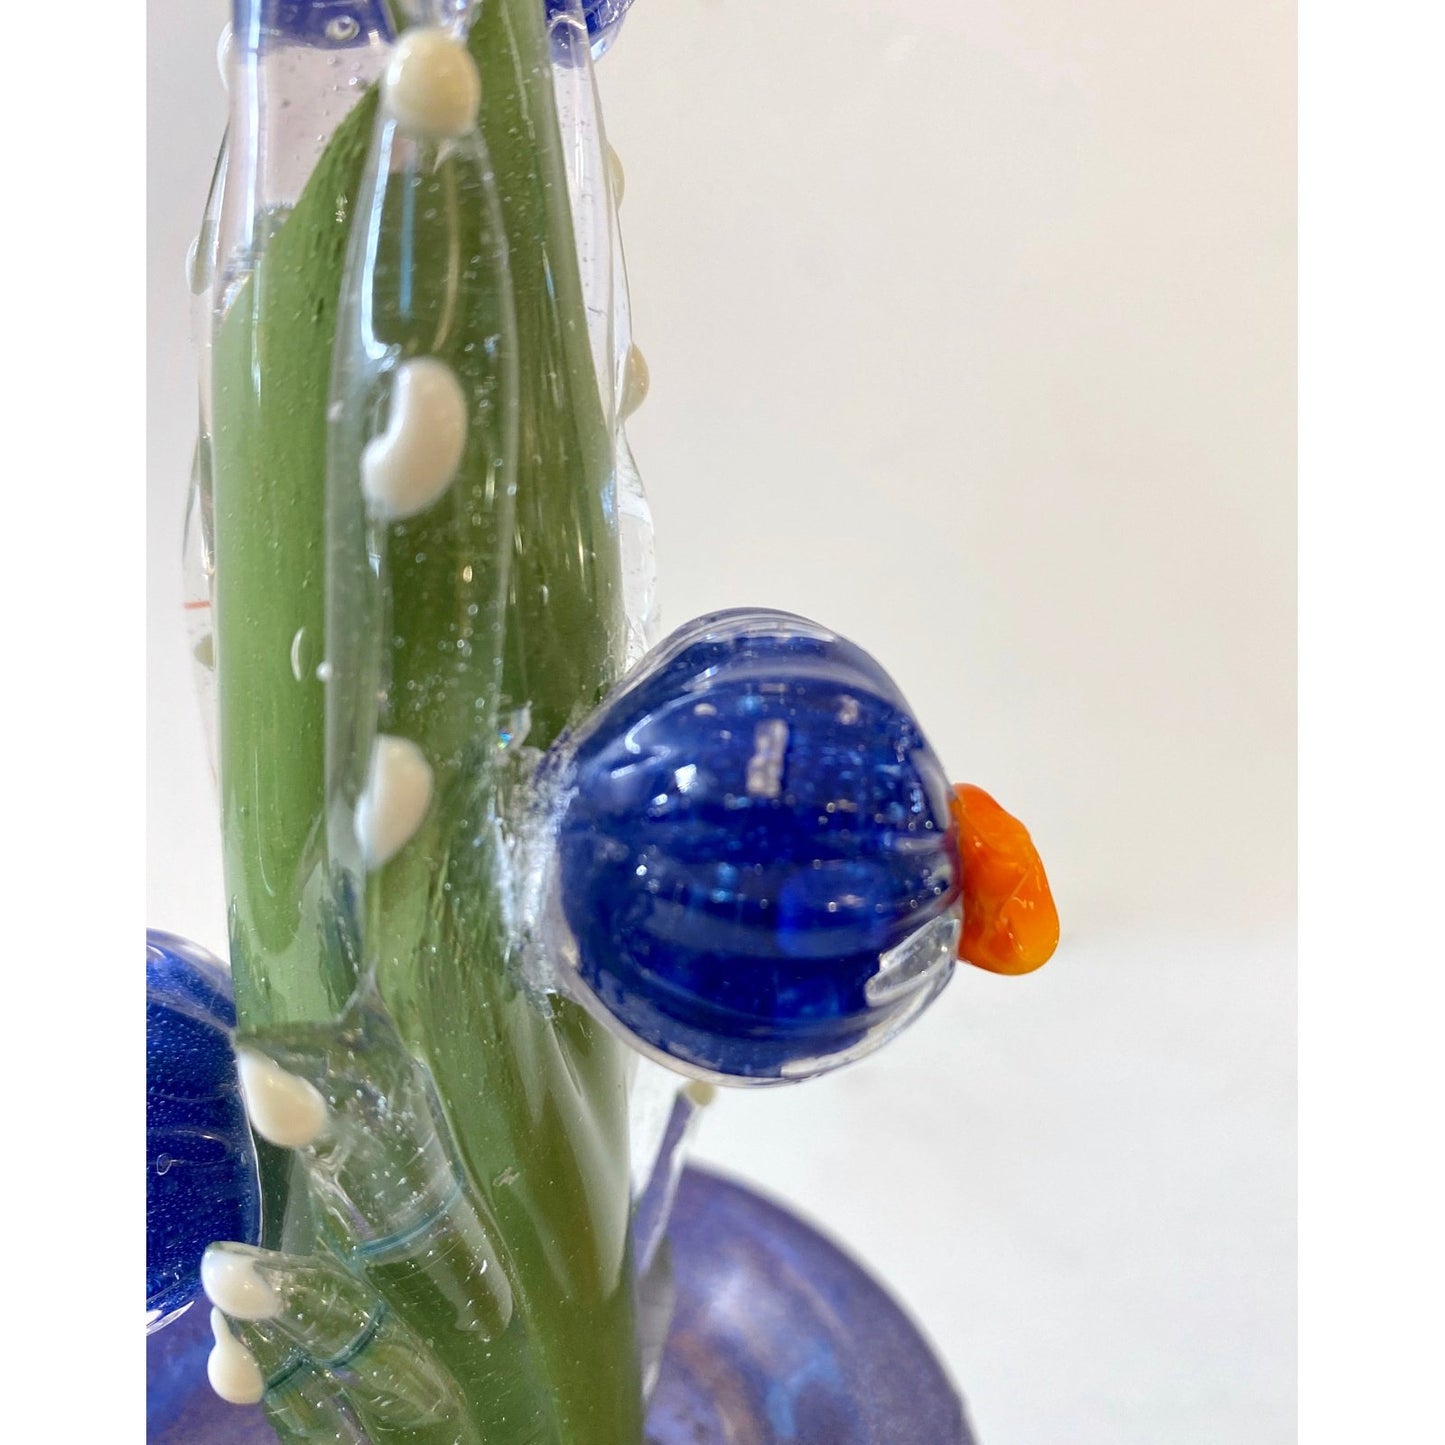 2000s Italian Moss Green Gold Murano Art Glass Cactus Plant with Blue Flowers